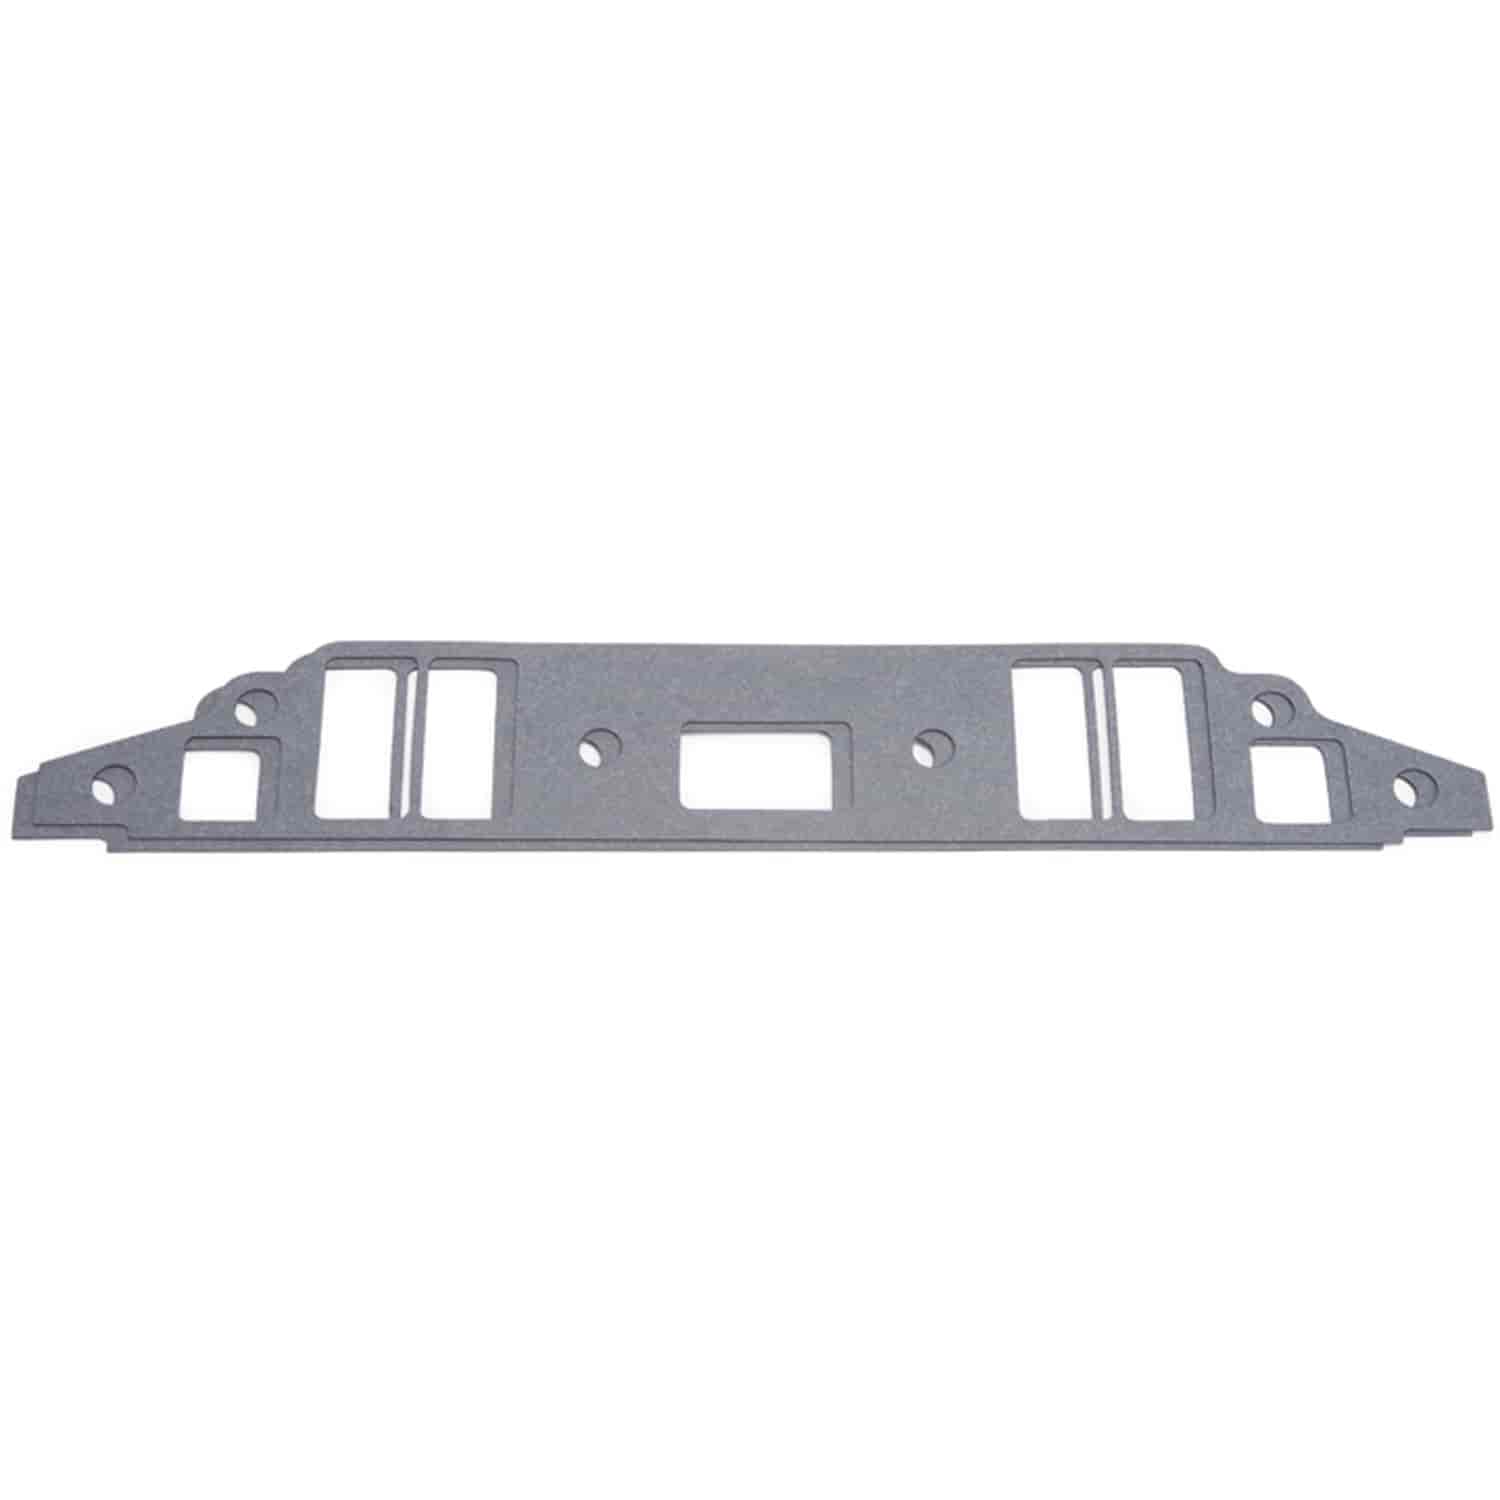 Intake Gaskets for Buick 400-455 V8